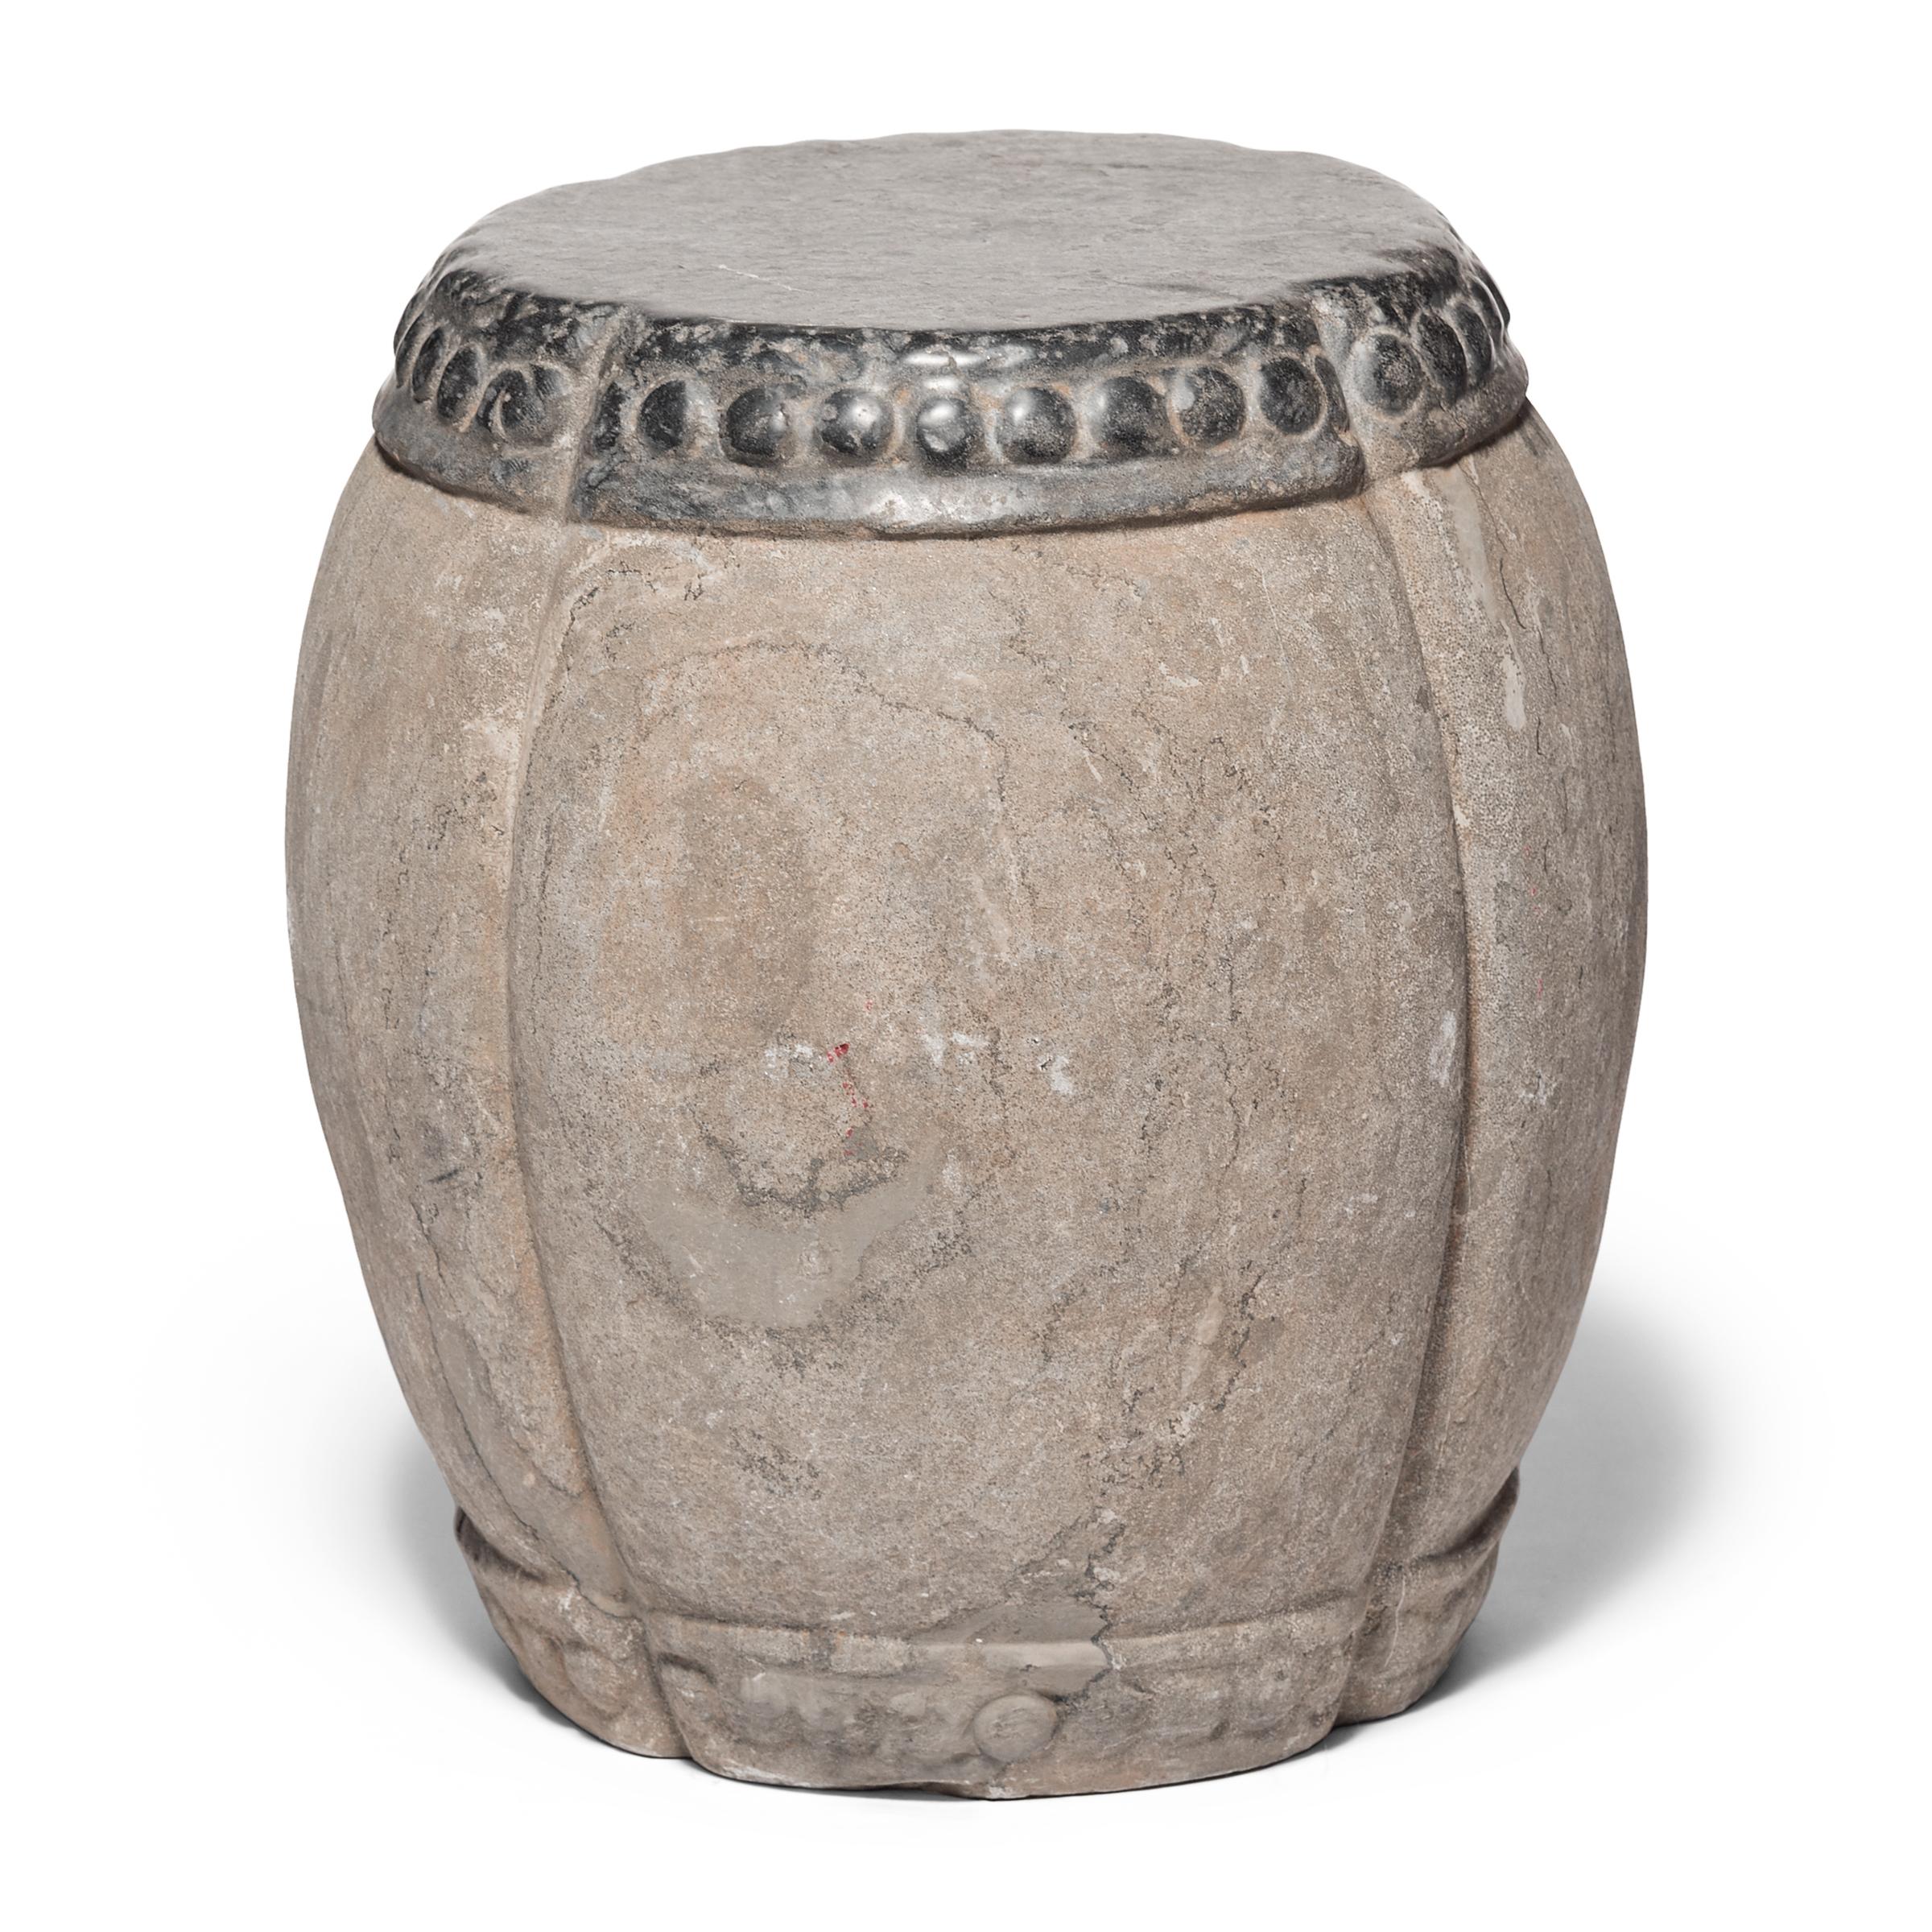 Marked by expressive veining, this handsome stool was carved in China’s Shanxi province out of a piece of solid limestone. Ribbed and rounded, the stool suggests a melon, an ancient Chinese symbol of perpetuity. A pattern of boss-head nails ringing